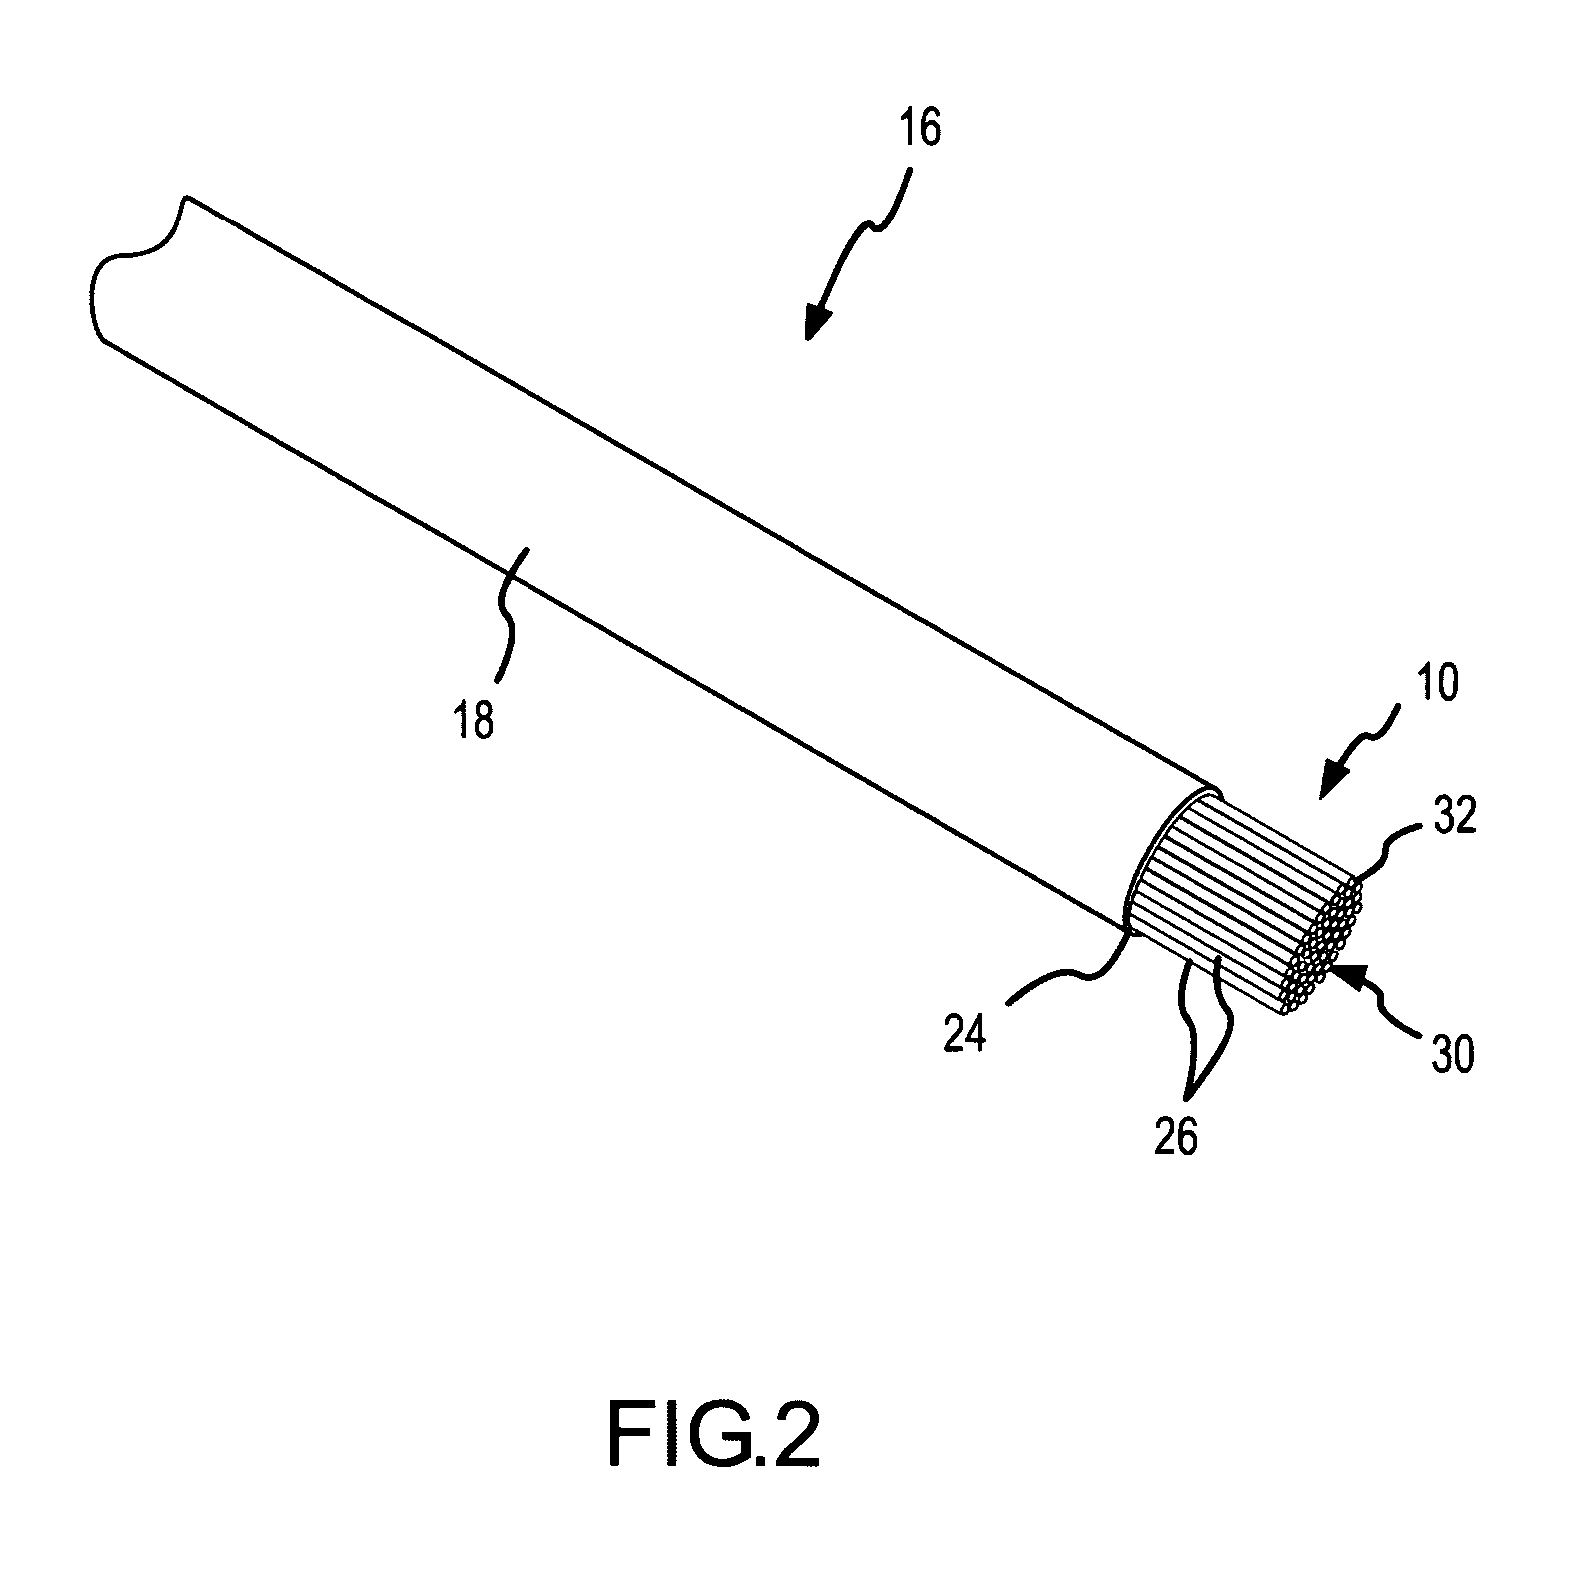 Conforming-electrode catheter and method for ablation